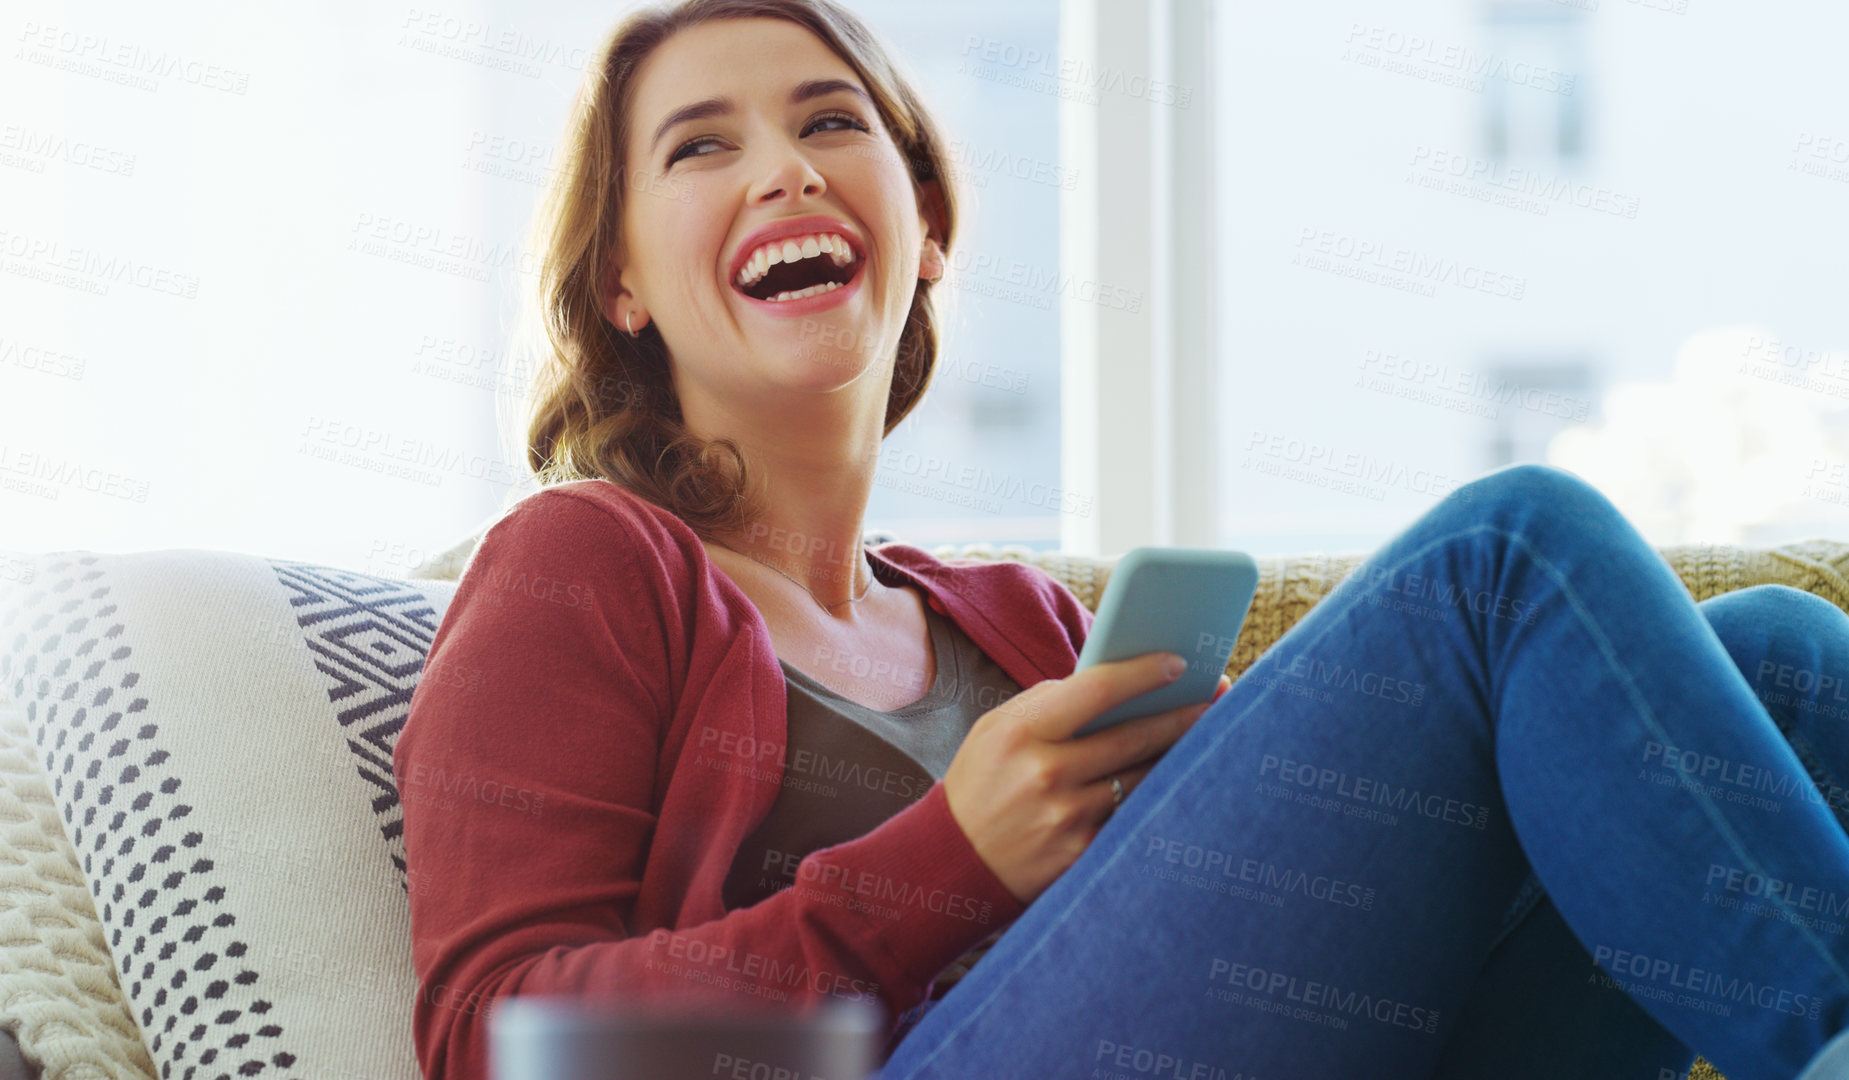 Buy stock photo Cropped shot of an attractive young woman sitting on her sofa alone and laughing while using her cellphone